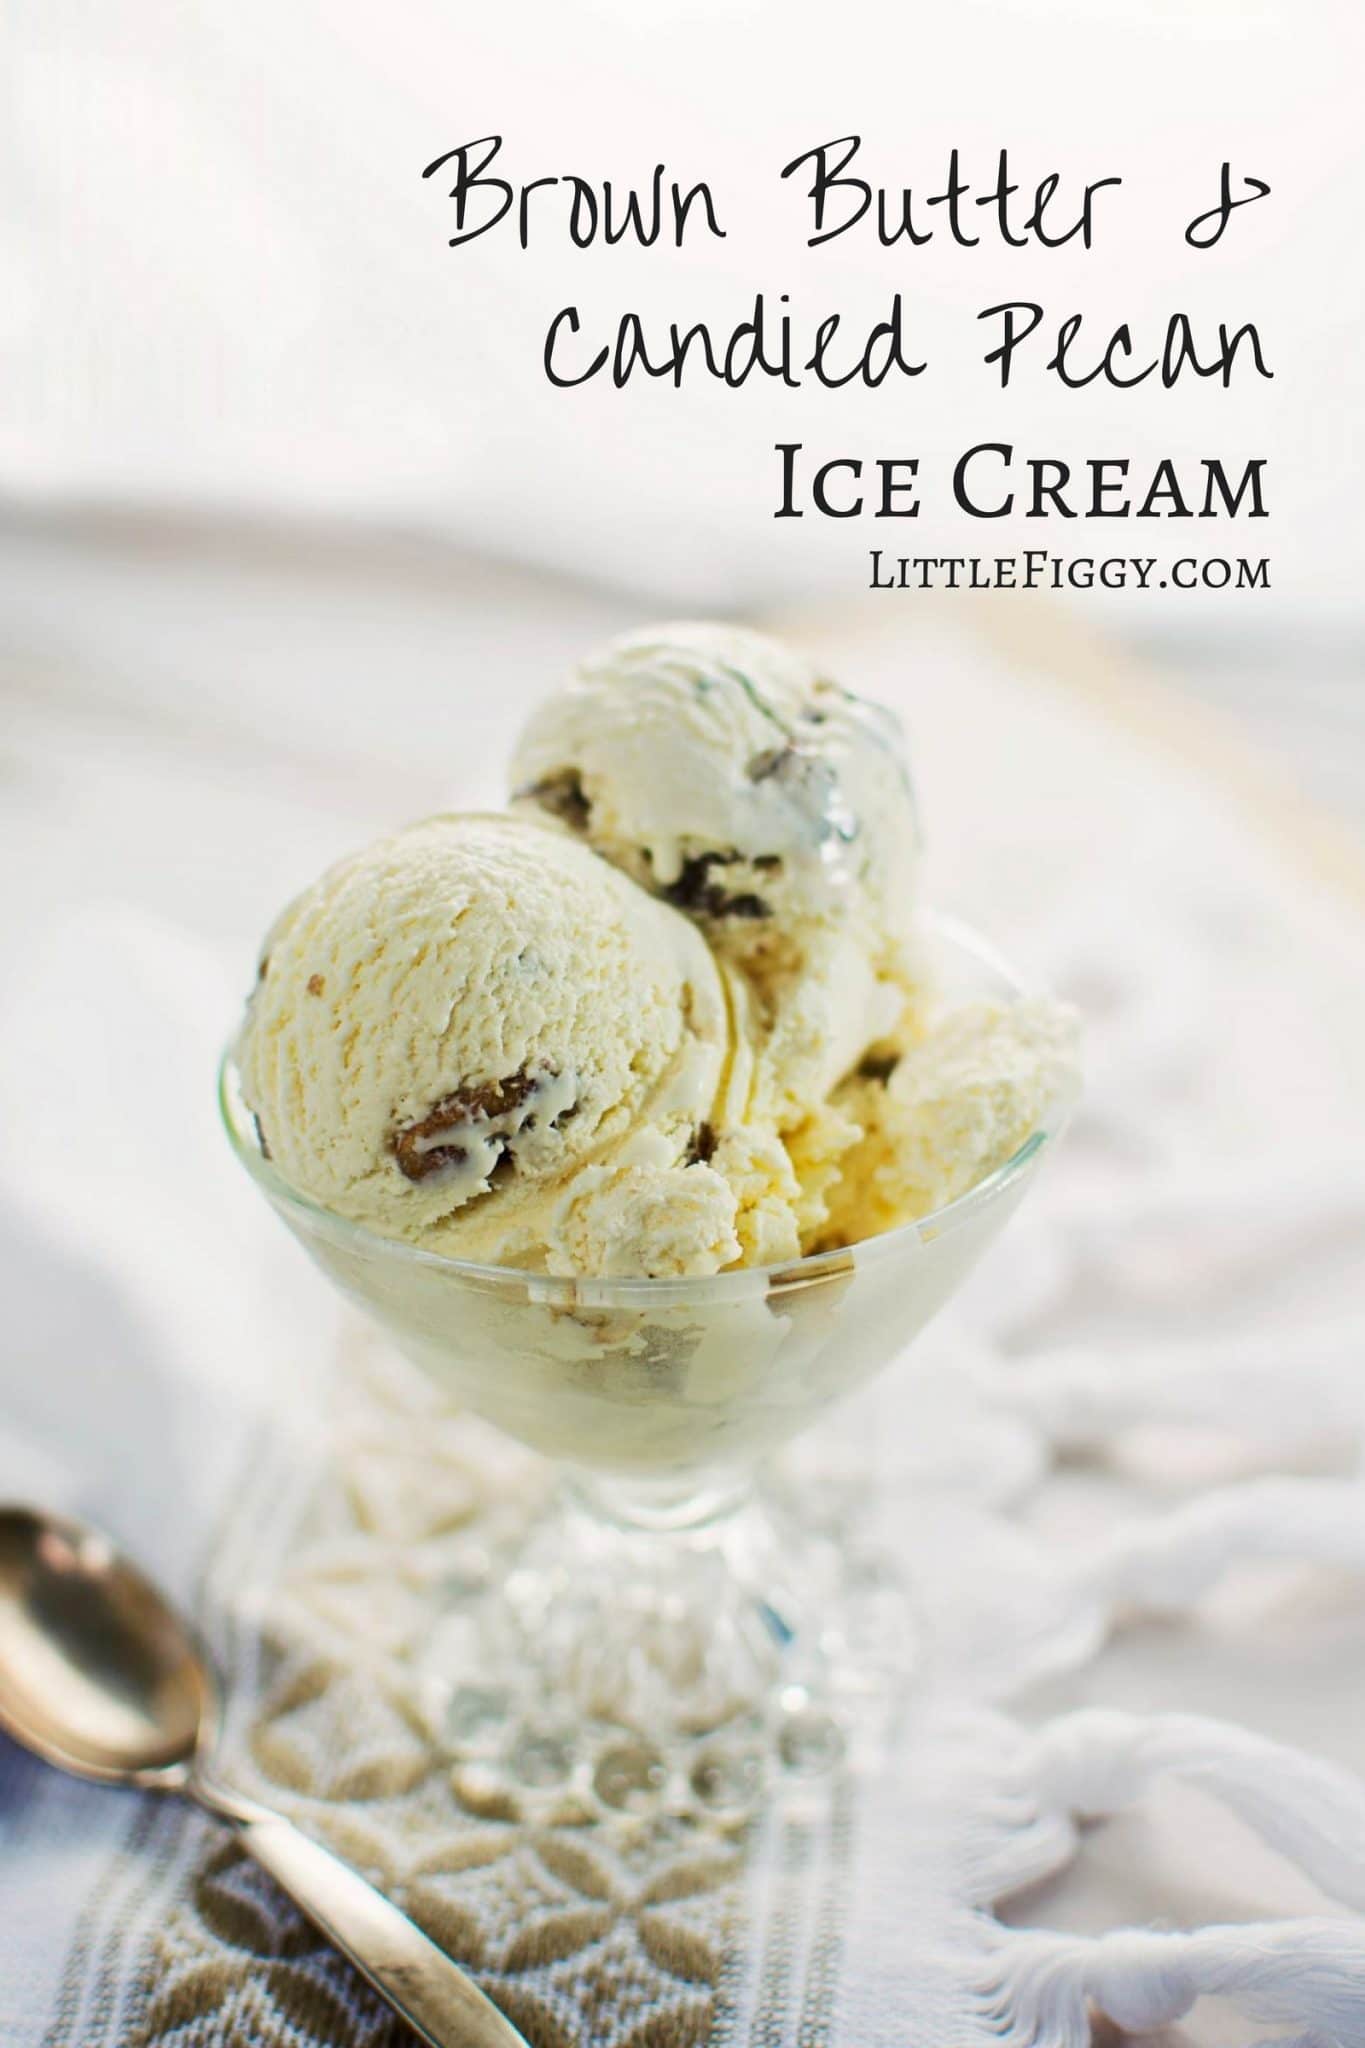 Brown Butter Candied Pecan Ice Cream, taking the everyday butter pecan ice cream to a new level. Get the recipe at Little Figgy Food